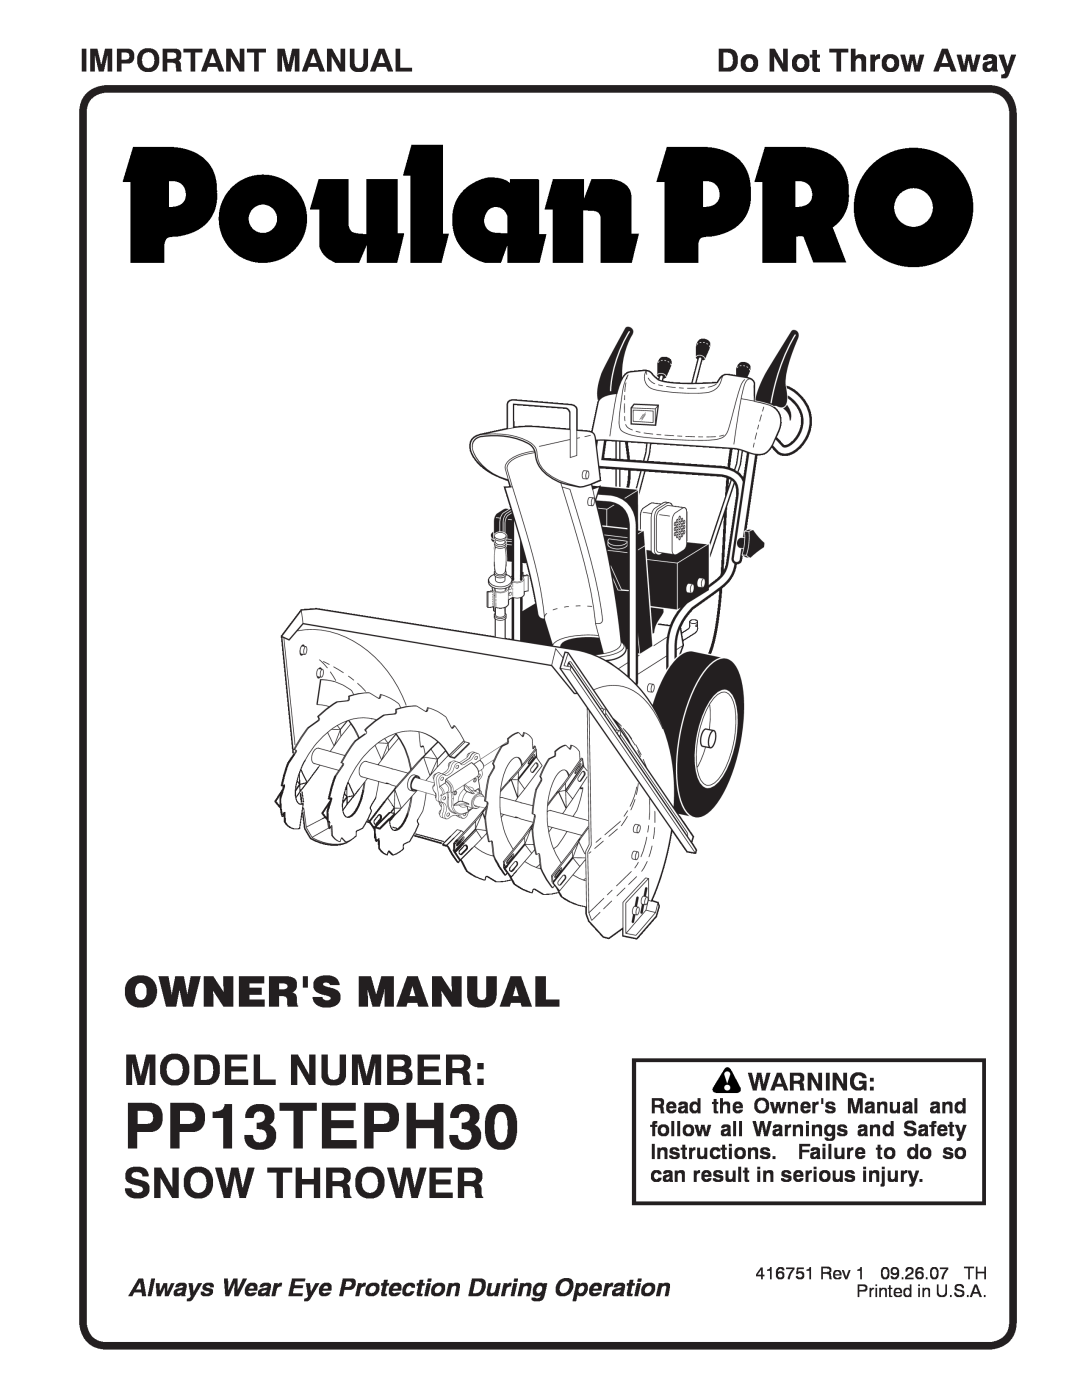 Poulan 96198000901, 416751, PP12TEPH30 owner manual Snow Thrower, Important Manual, PP13TEPH30, Do Not Throw Away 